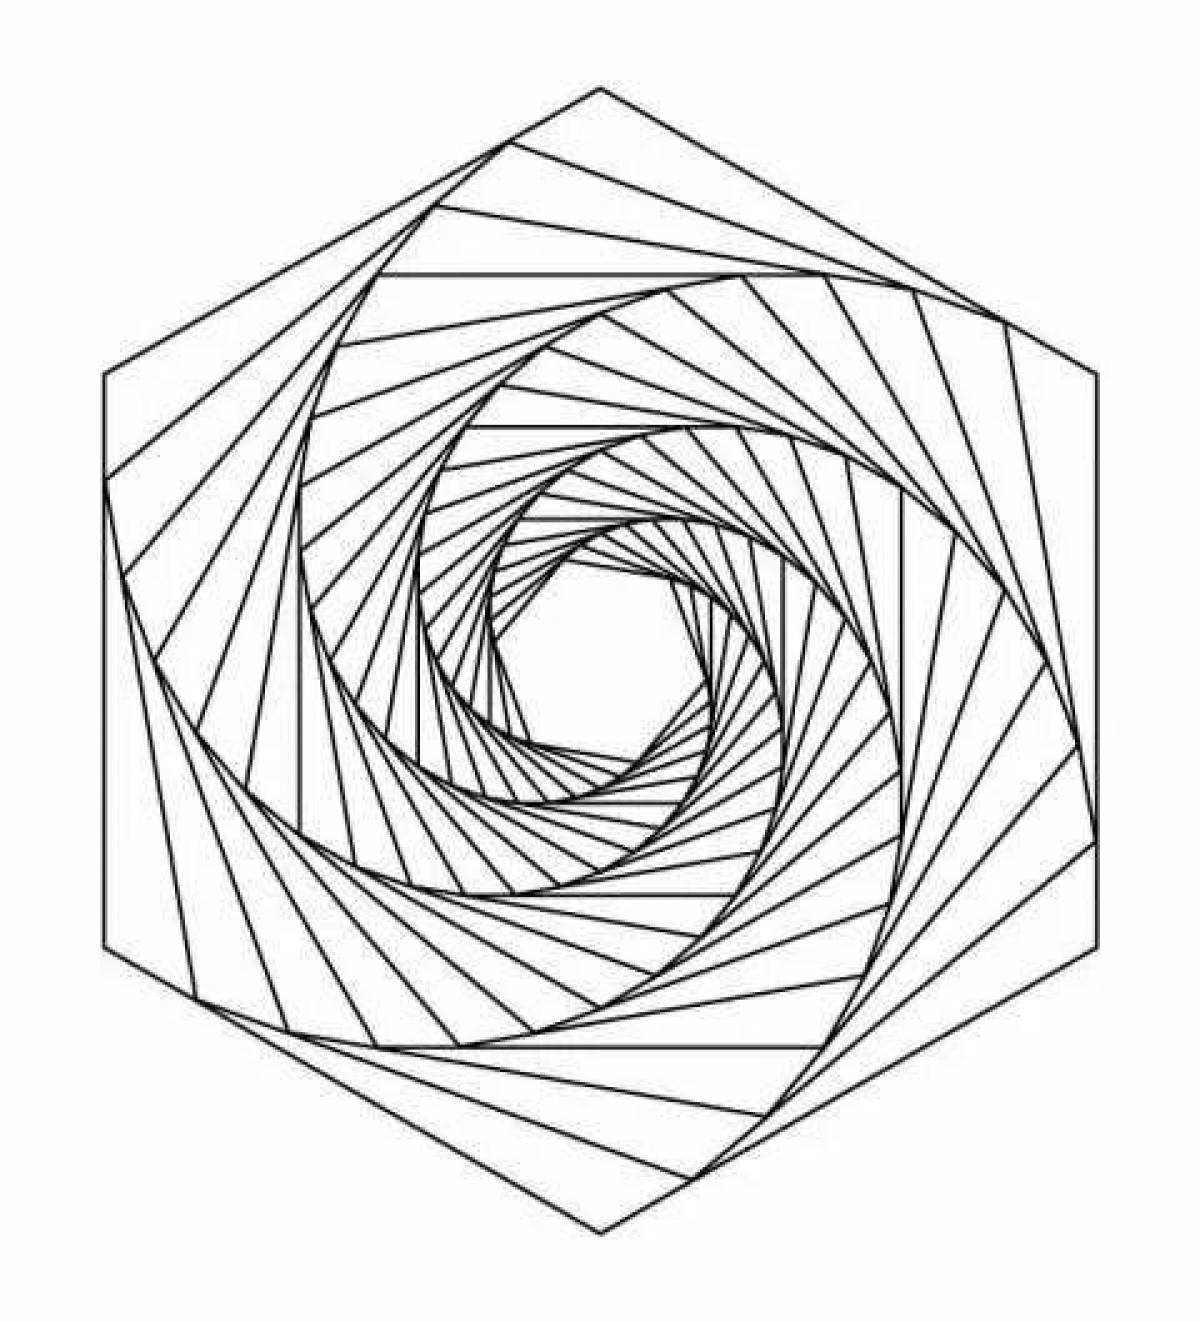 Create coloring page bright round spiral